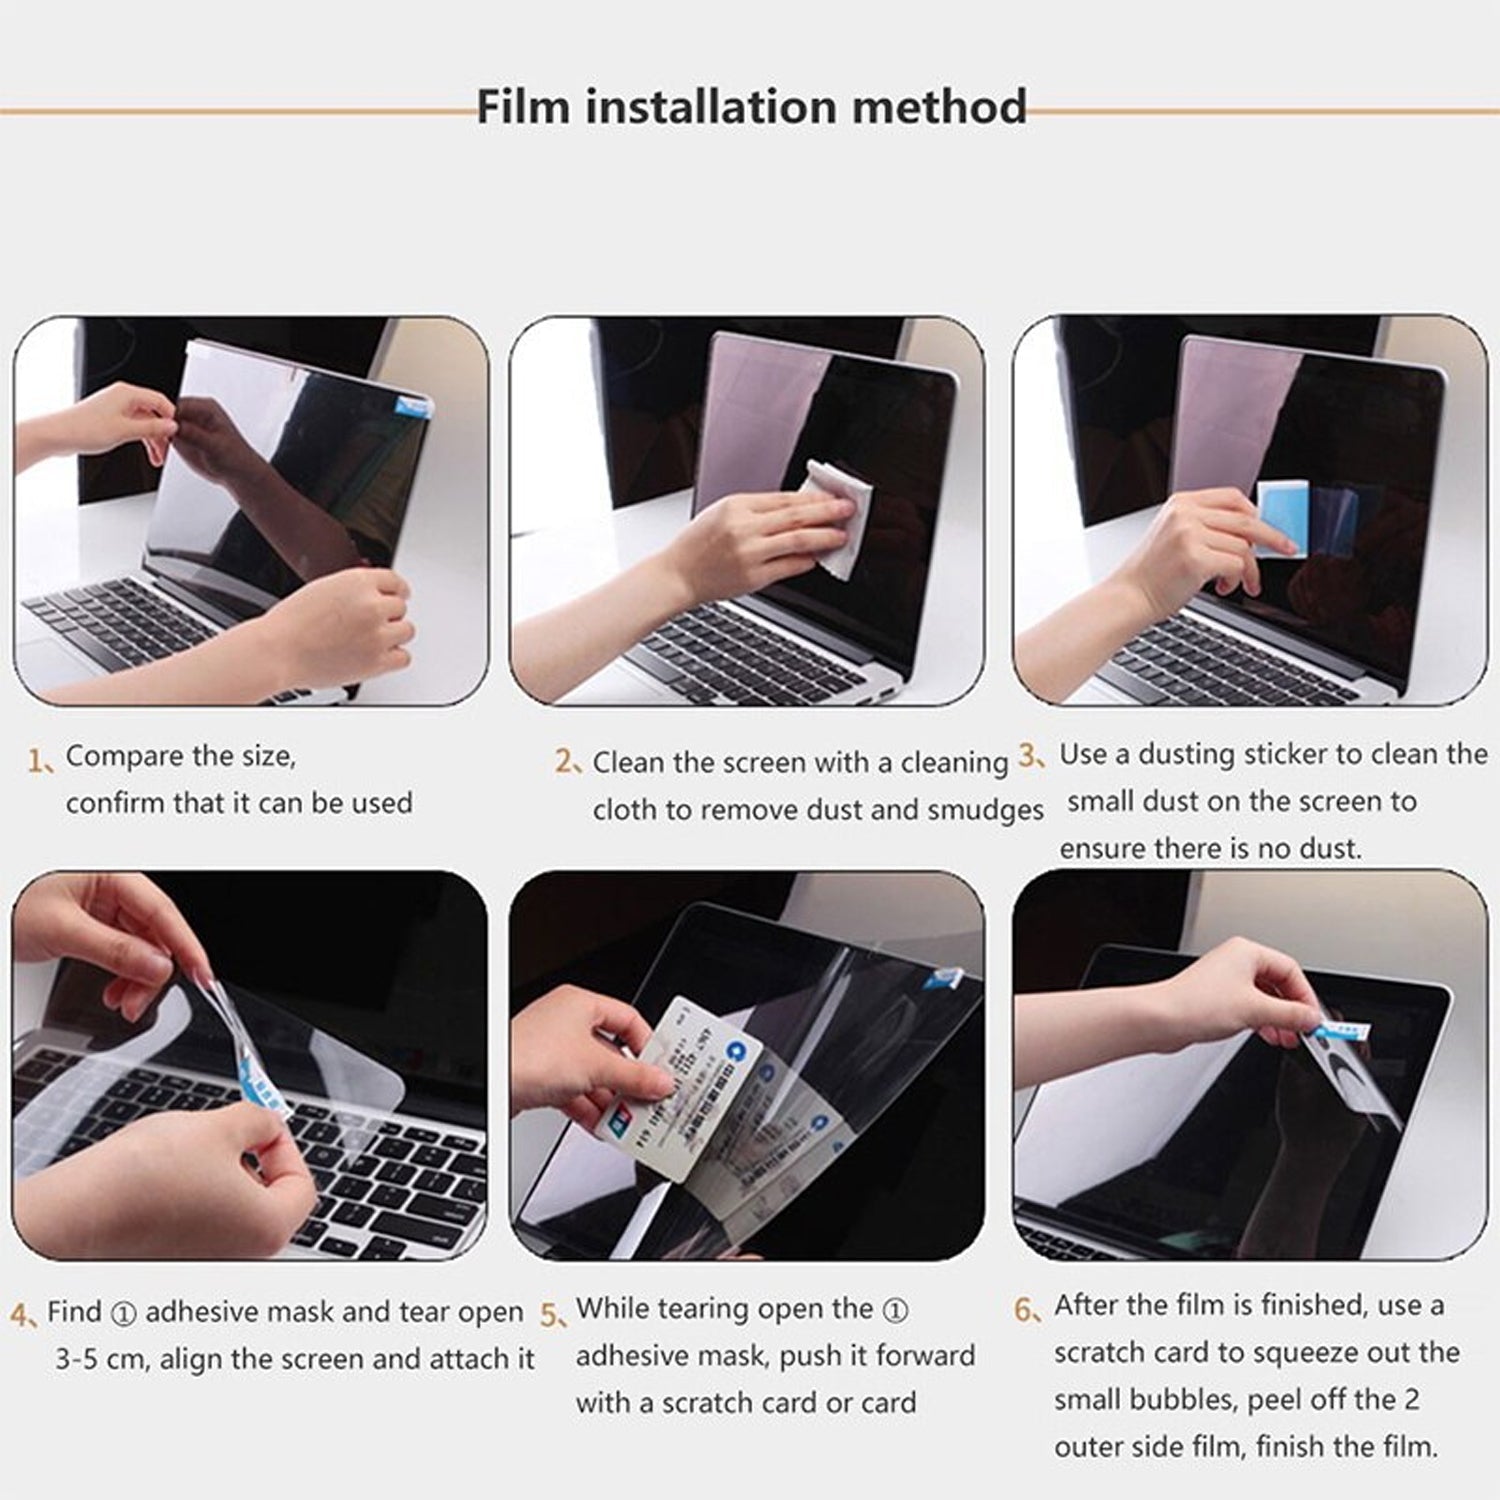 6949A  LAPTOP SCREEN PROTECTOR FOR 35CMX20CM DISPLAYS- ANTI BLUE LIGHT EYE PROTECTION FILTER FILM, ACRYLIC HANG ANTI-SCRATCH PROTECTOR PANEL, RELIEVE EYE FATIGUE, PROTECT EYESIGHT (35CMX20CM)